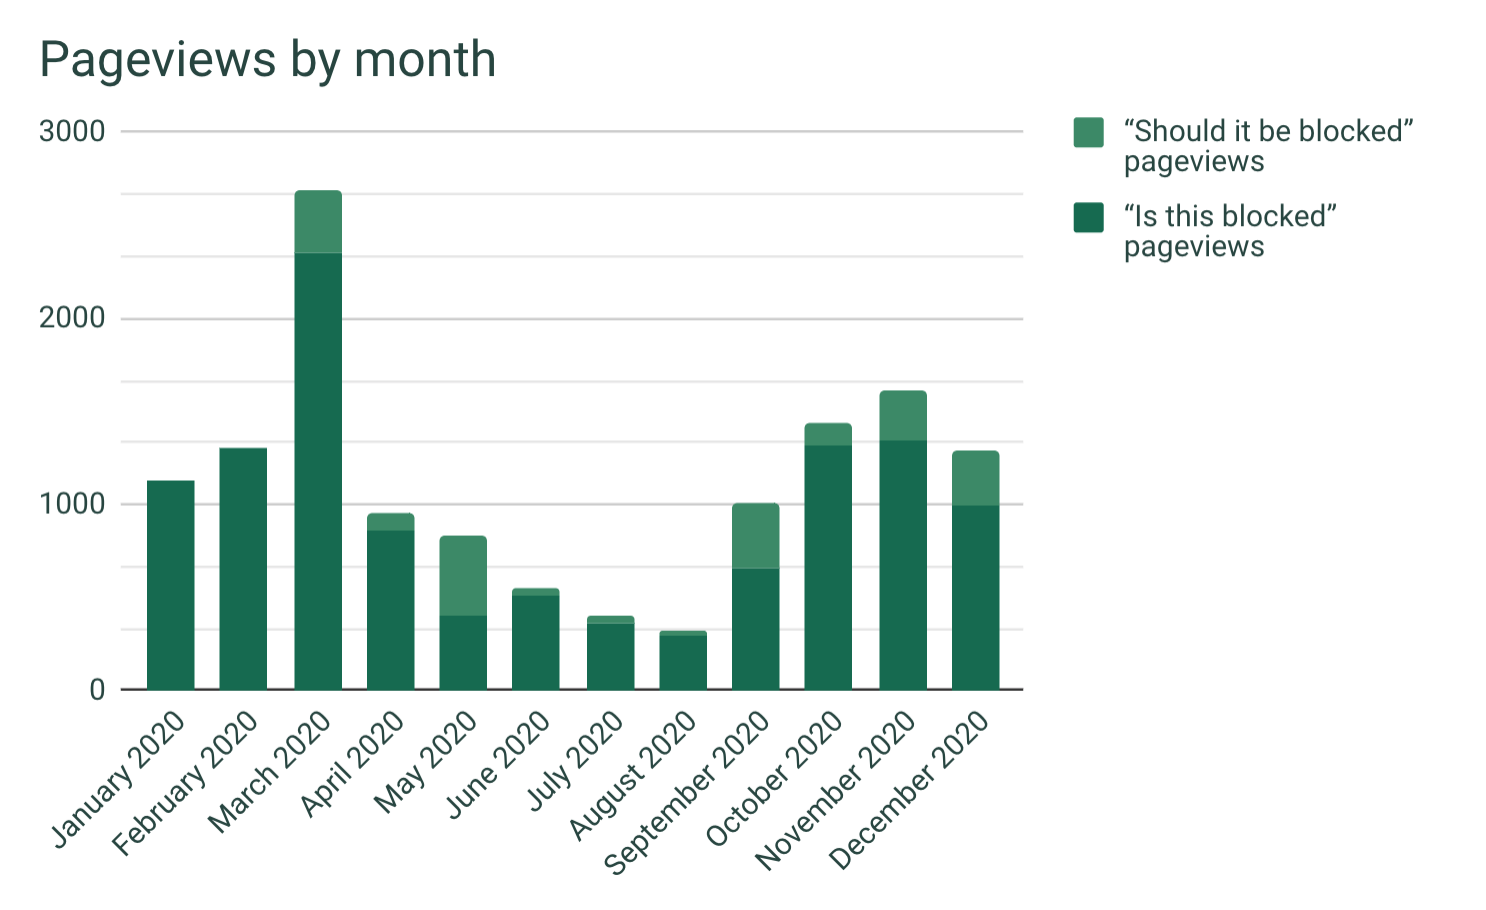 A stacked bar chart of website pageviews by month for both “Should it be blocked in my department” and “Is this blocked in my department”. The chart peaks in March 2020, just shy of 2,700 pageviews. Other months average around 1,000 pageviews, with a decline in the summer that then ramps up again in September and October.